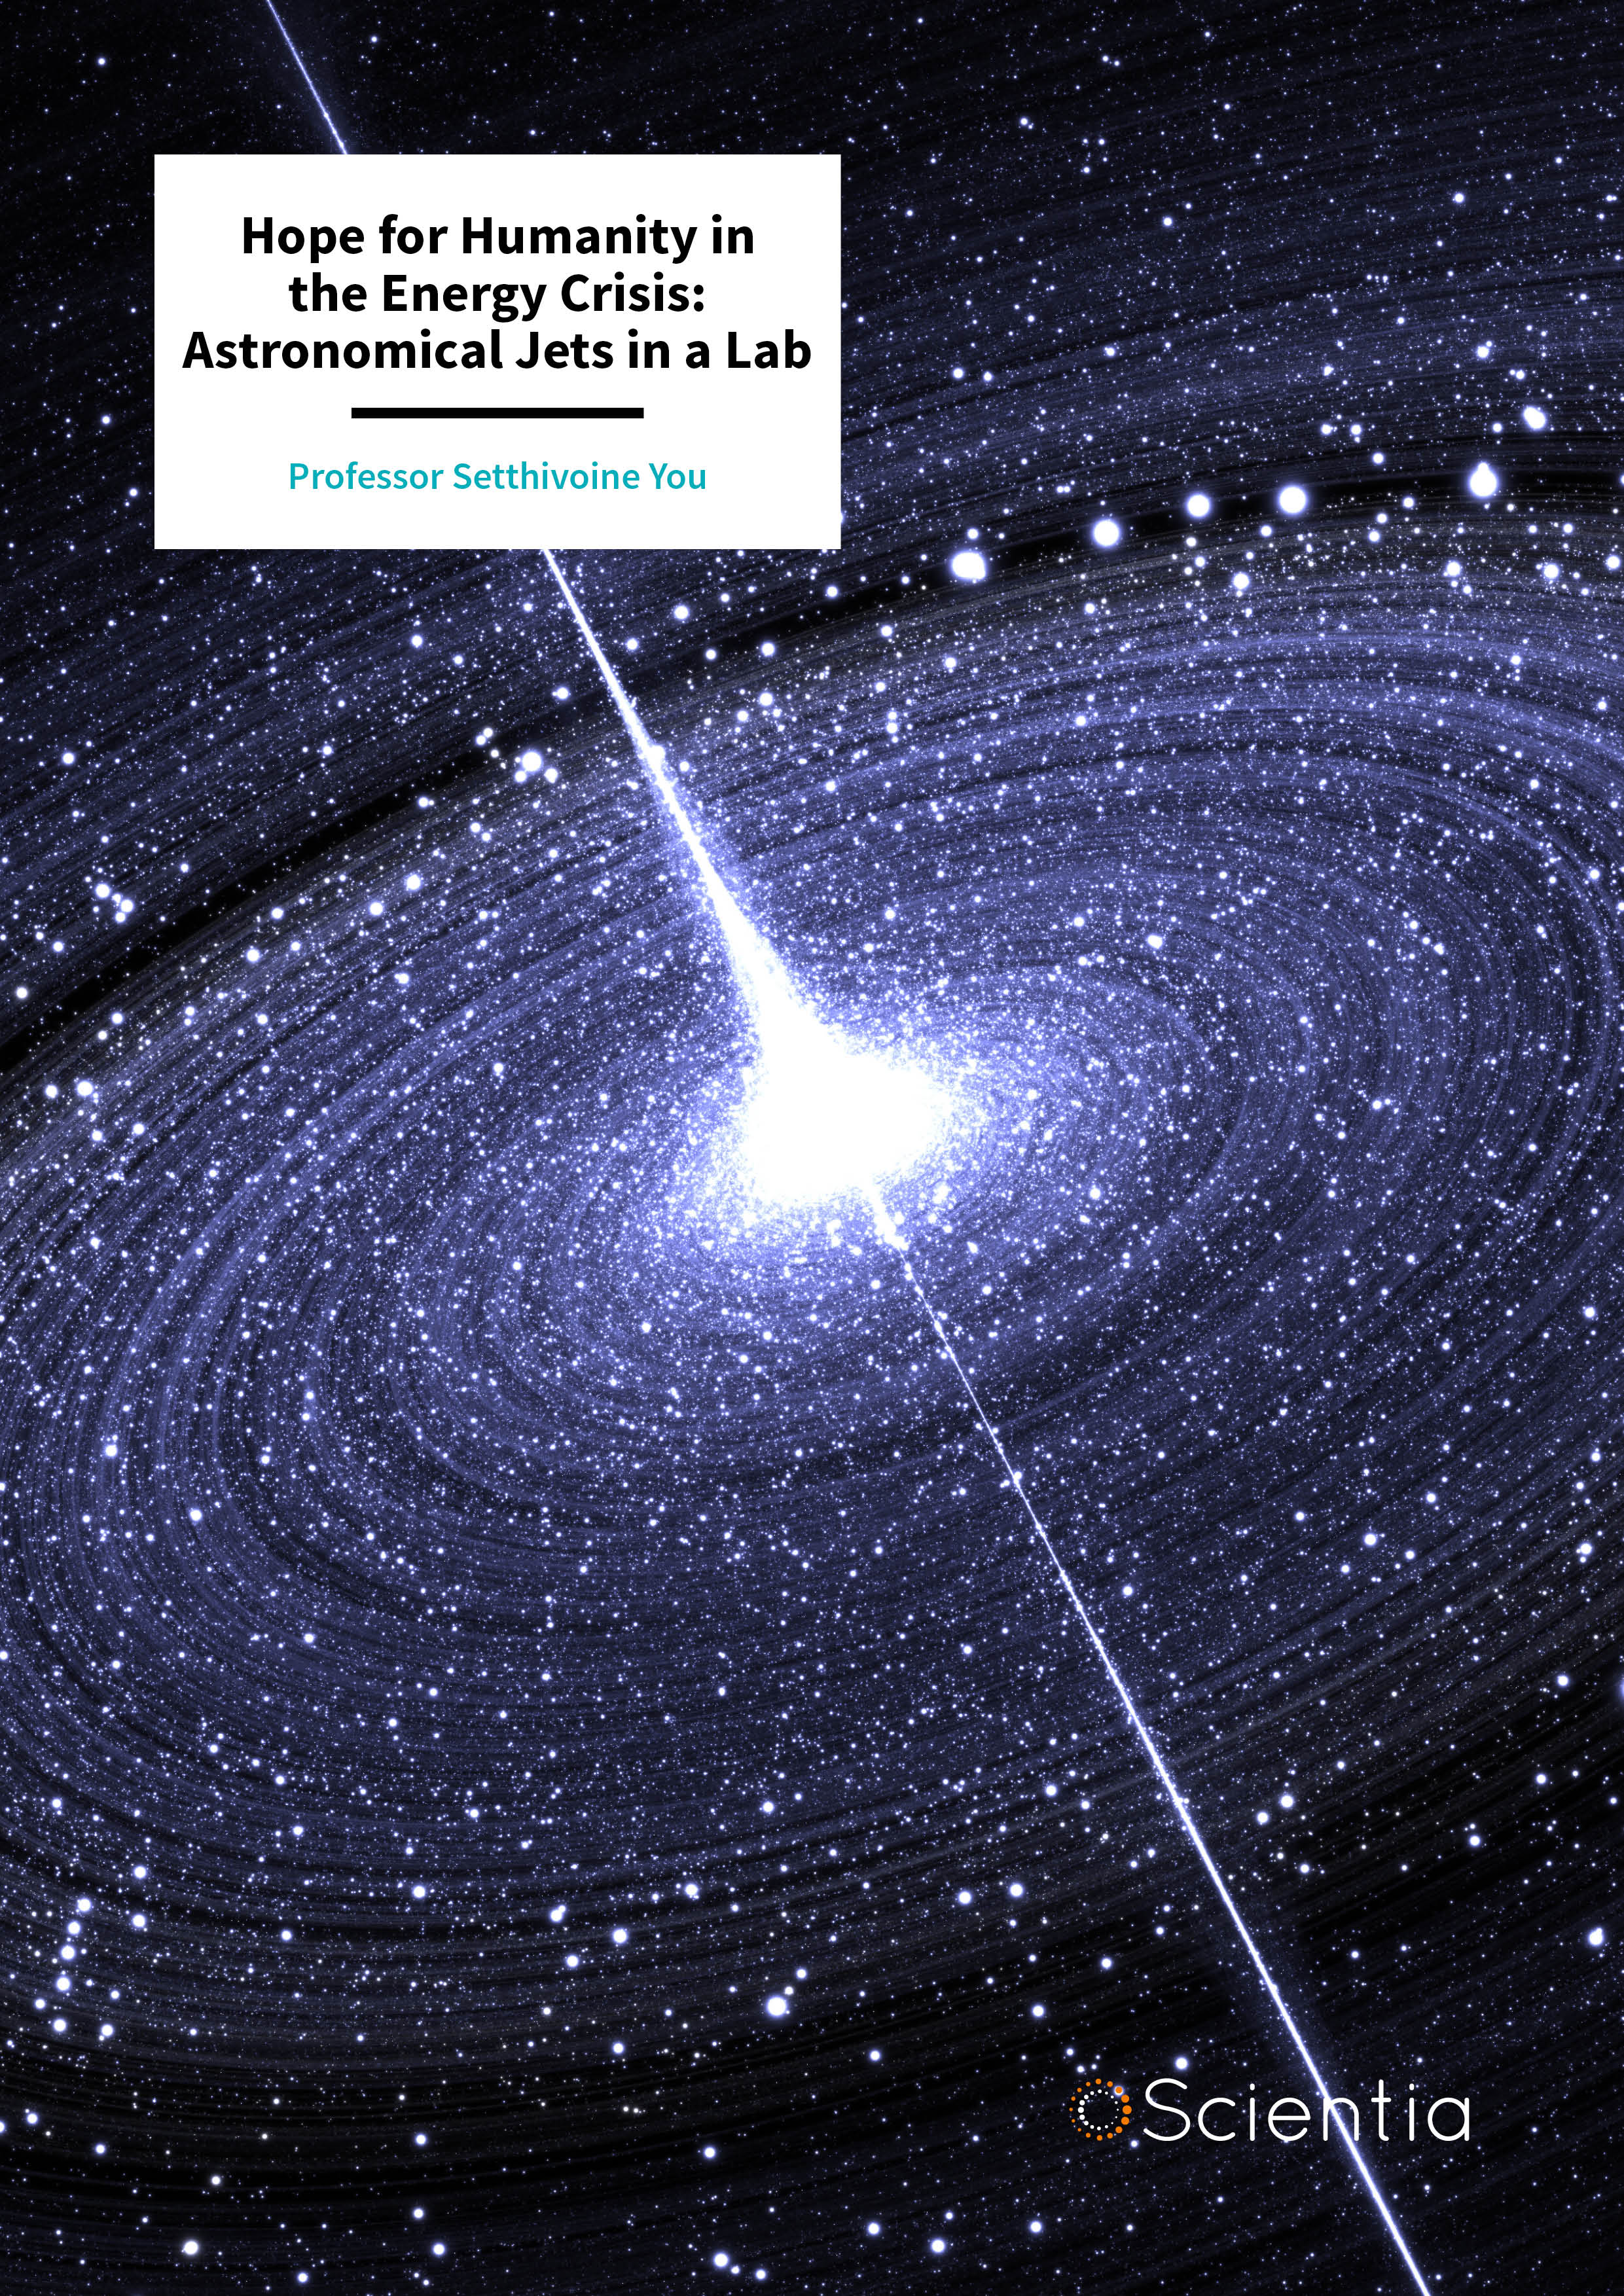 Professor Setthivoine You – Hope for Humanity in the Energy Crisis: Astronomical Jets in a Lab